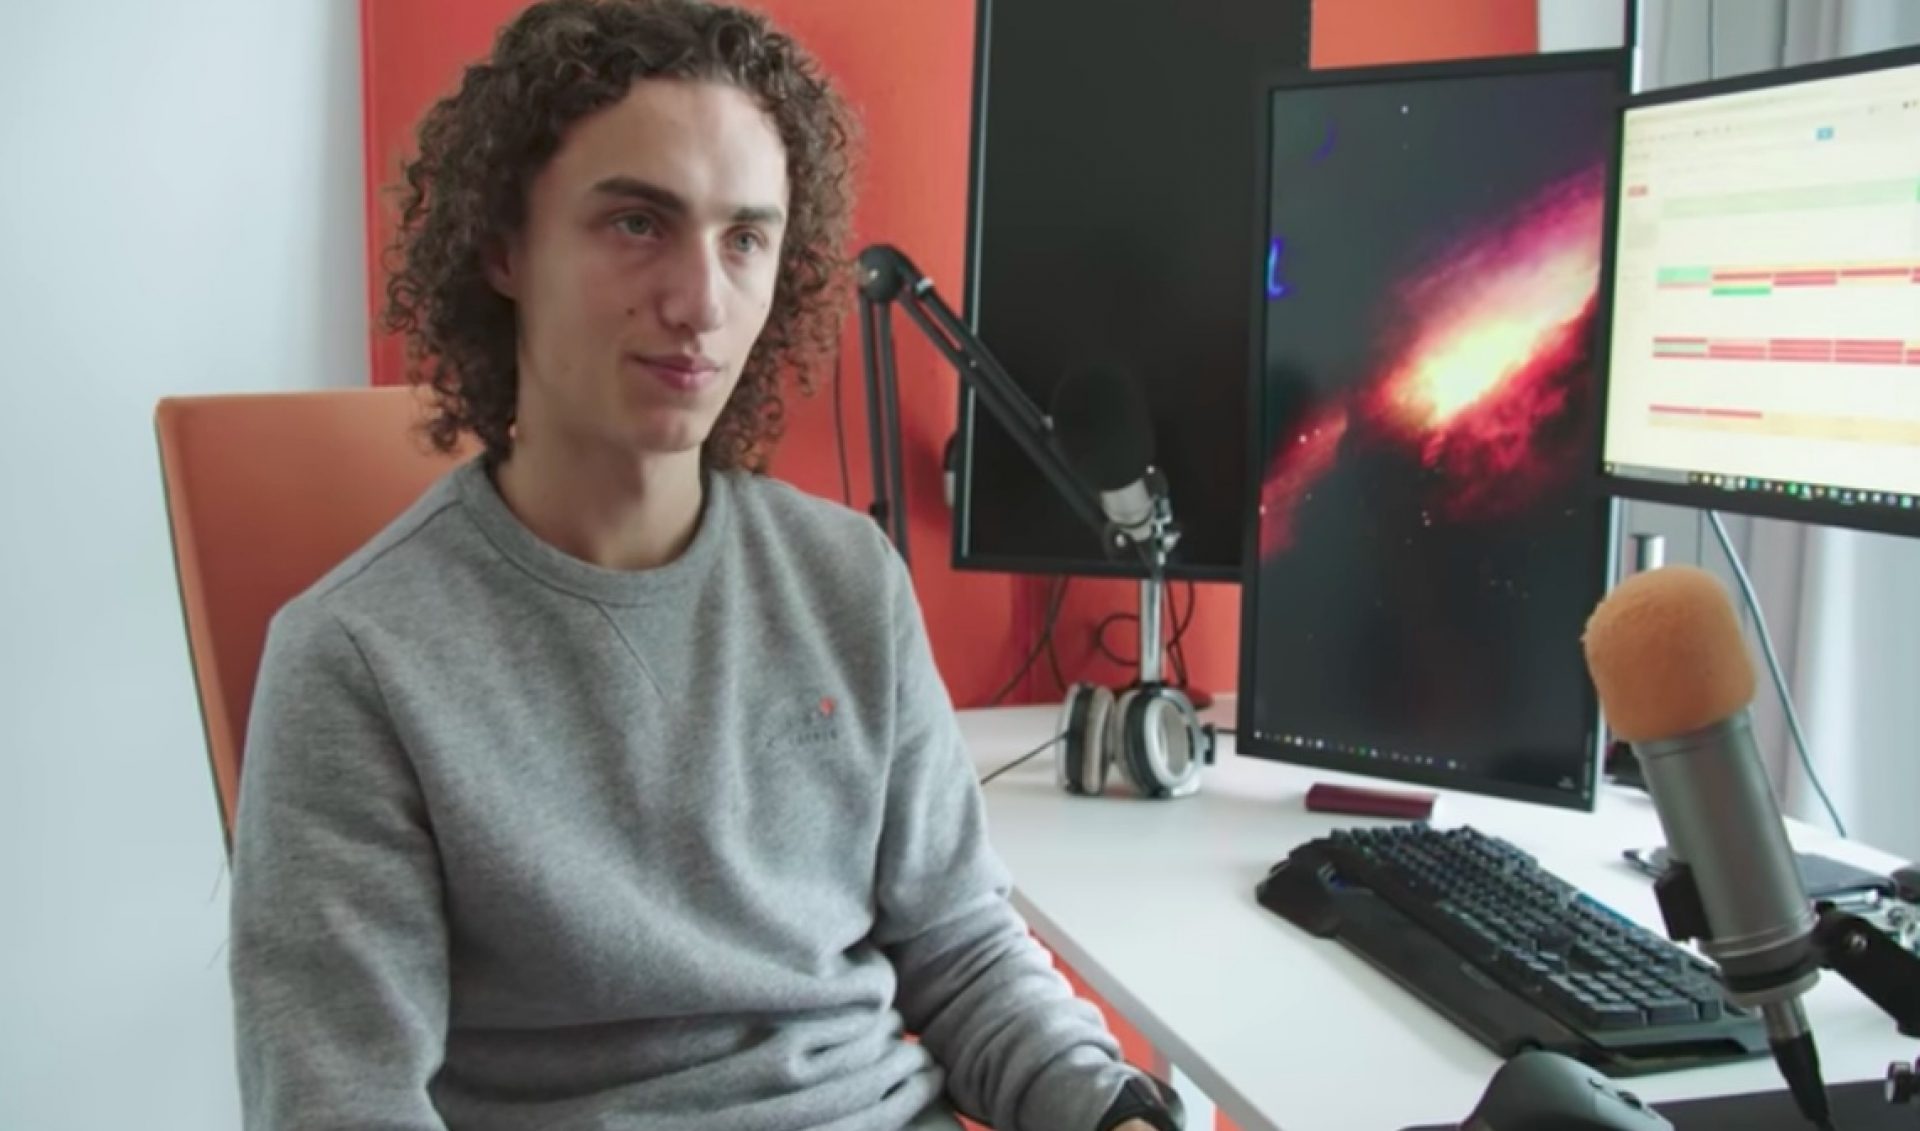 Dutch Documentary, With Insights From Creators Like Kwebbelkop, Offers Crash Course On YouTube